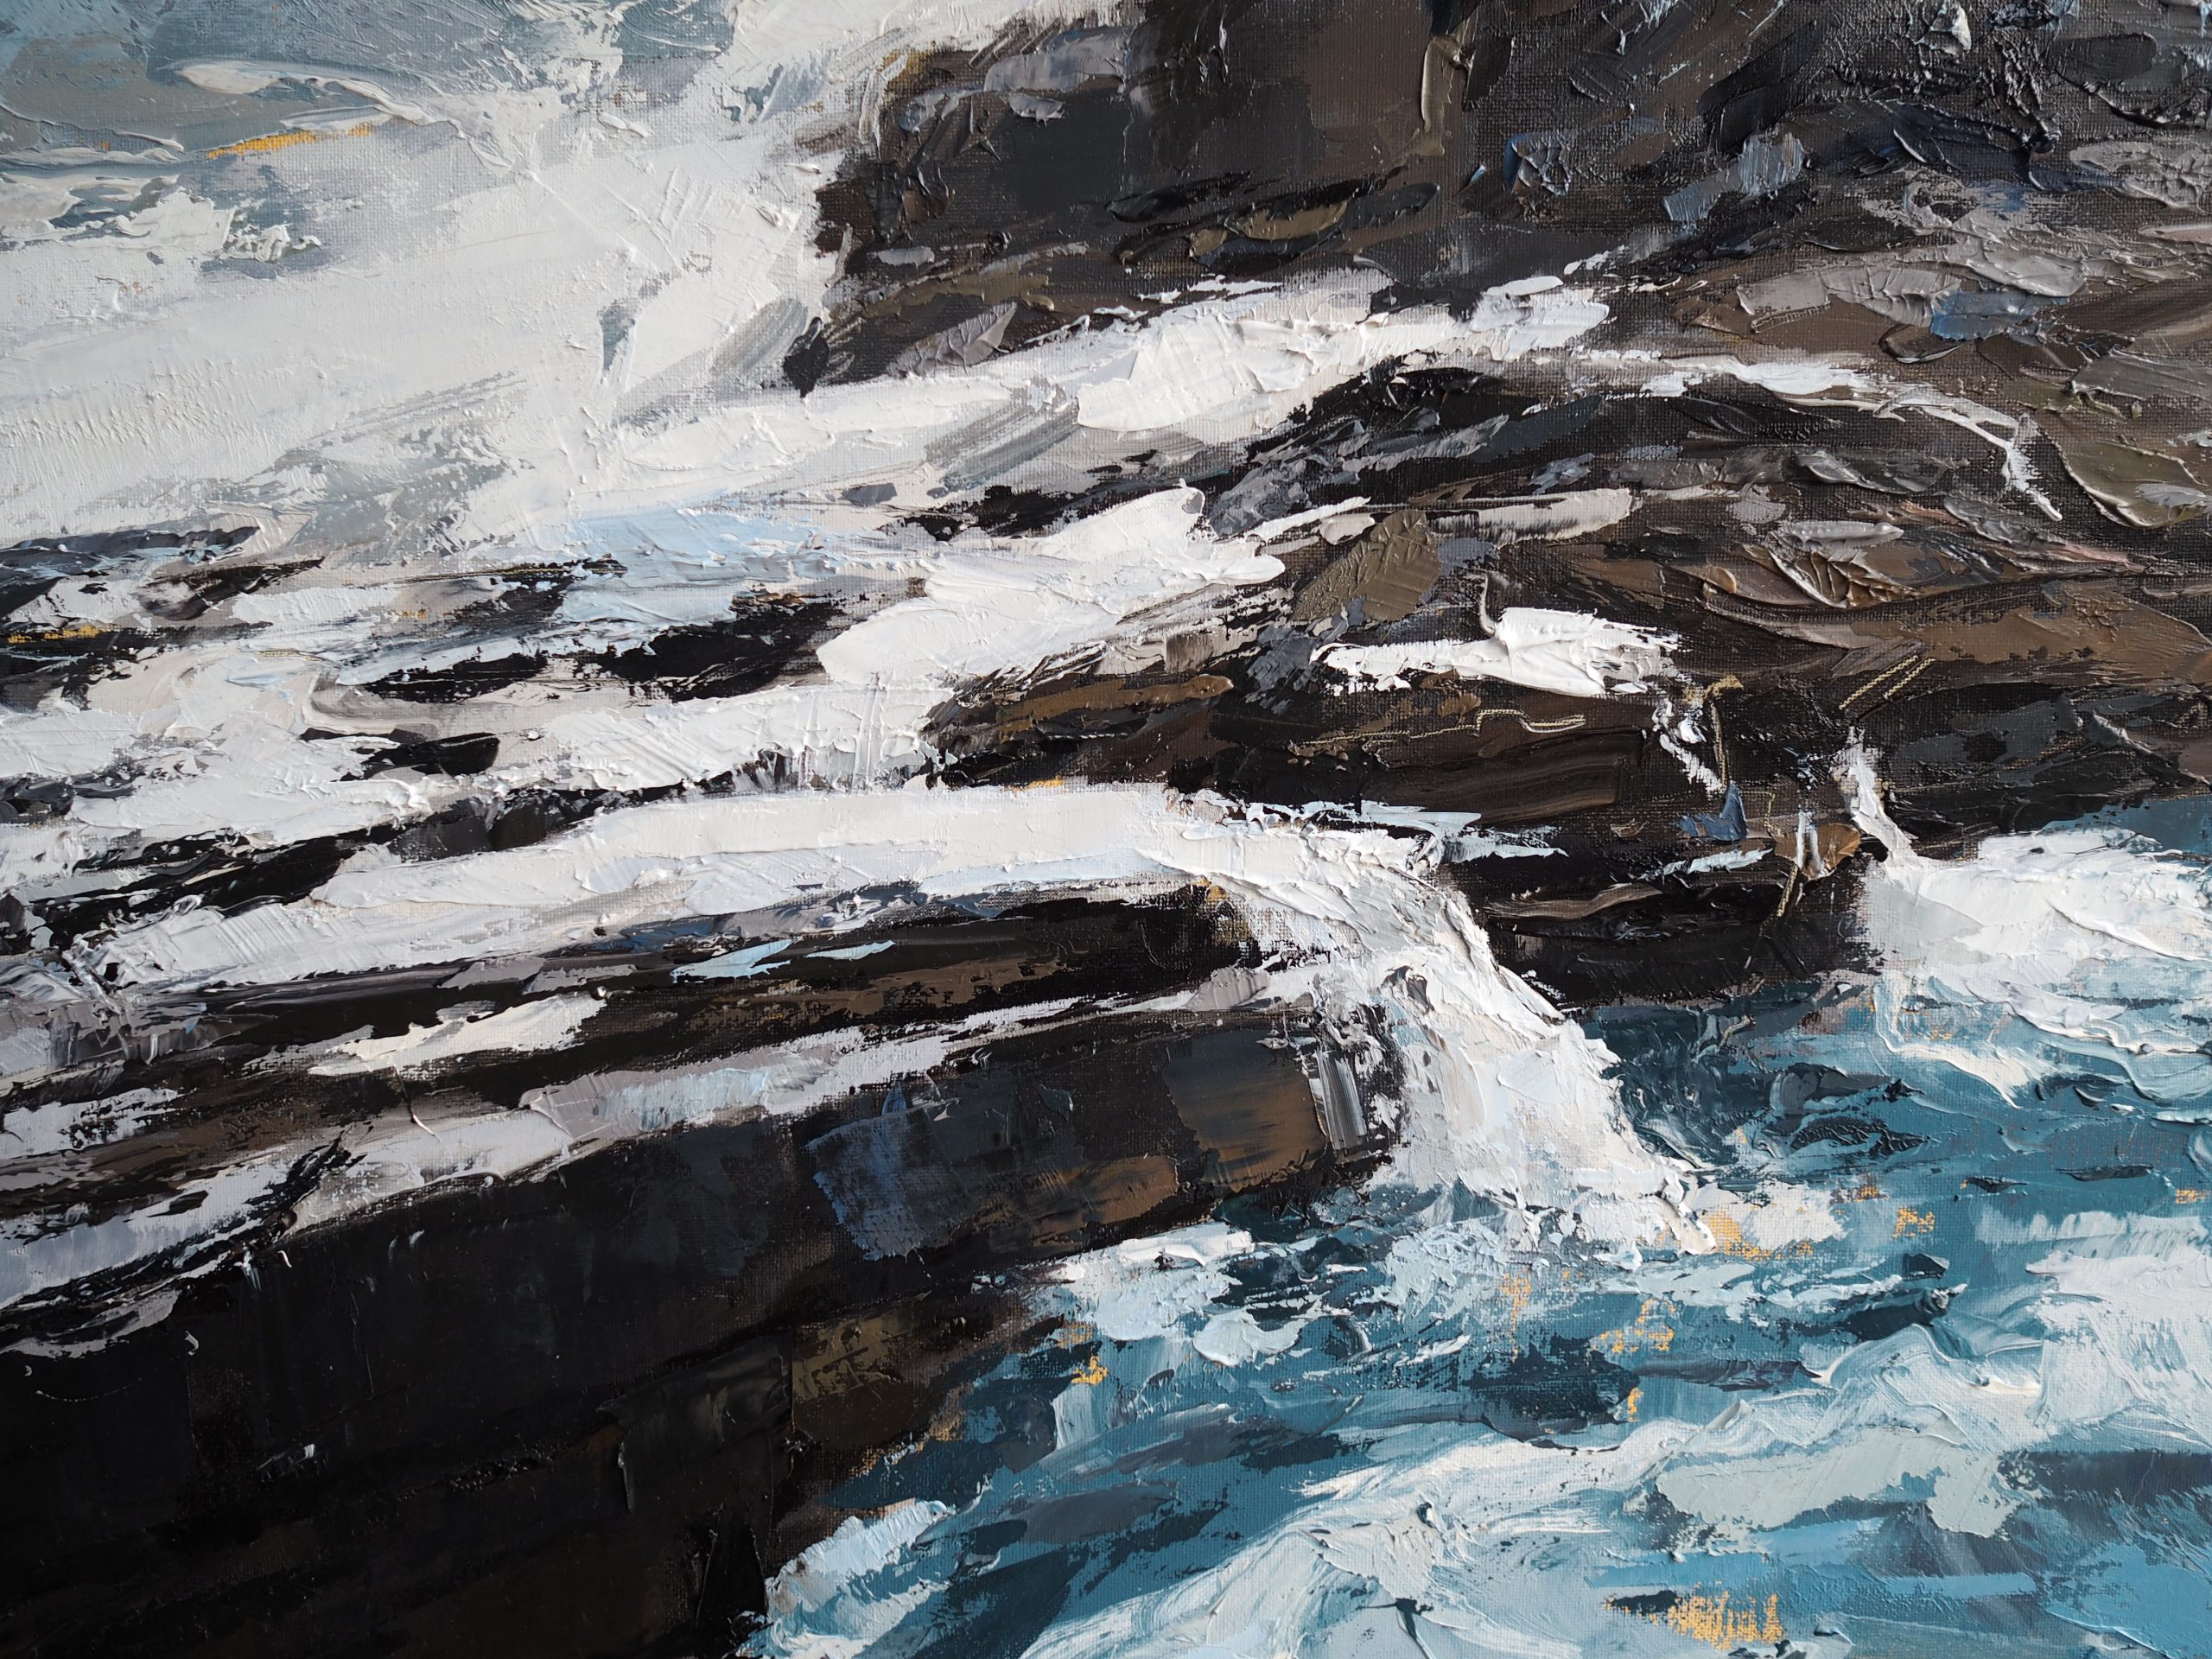 Ivan Daly Rise and Fall in Ross, seascape and rocks oil painting Irish art